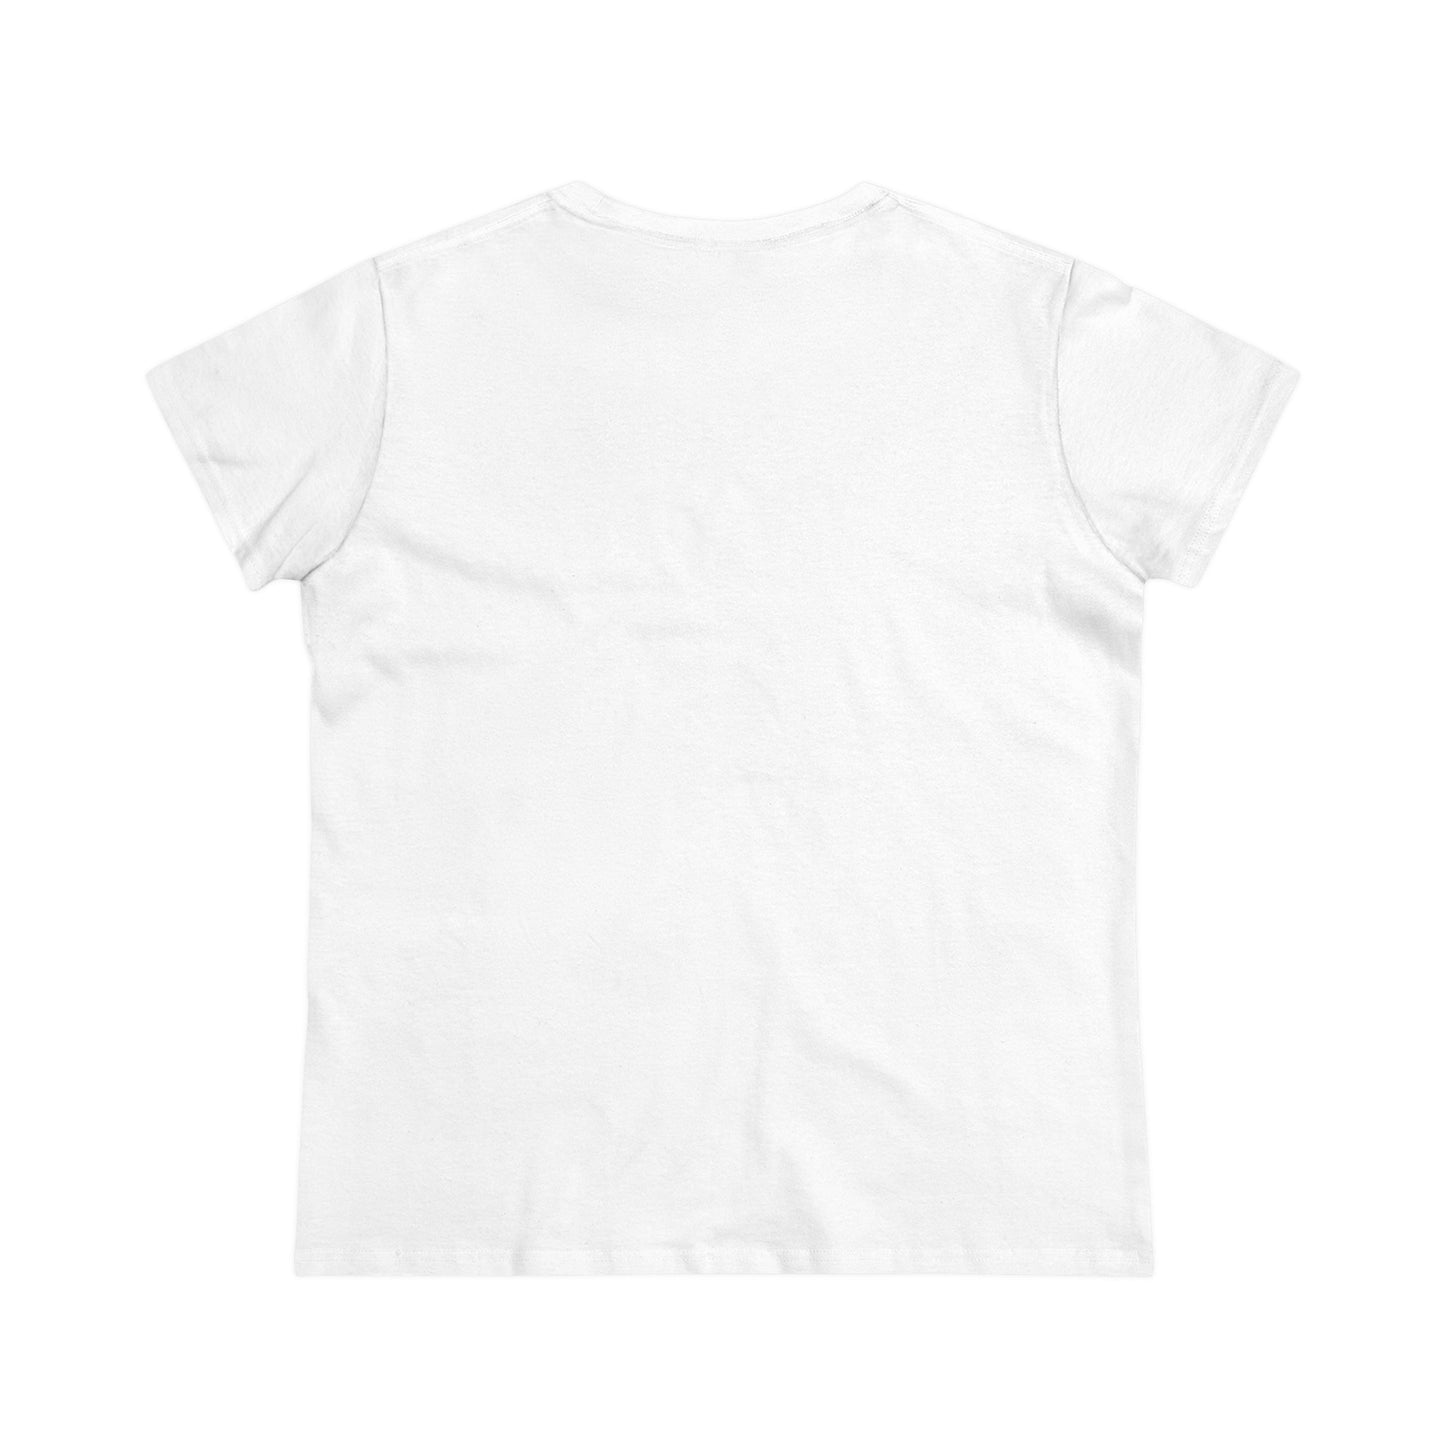 Olivia's Human Being Collection | Women's Midweight Cotton Tee